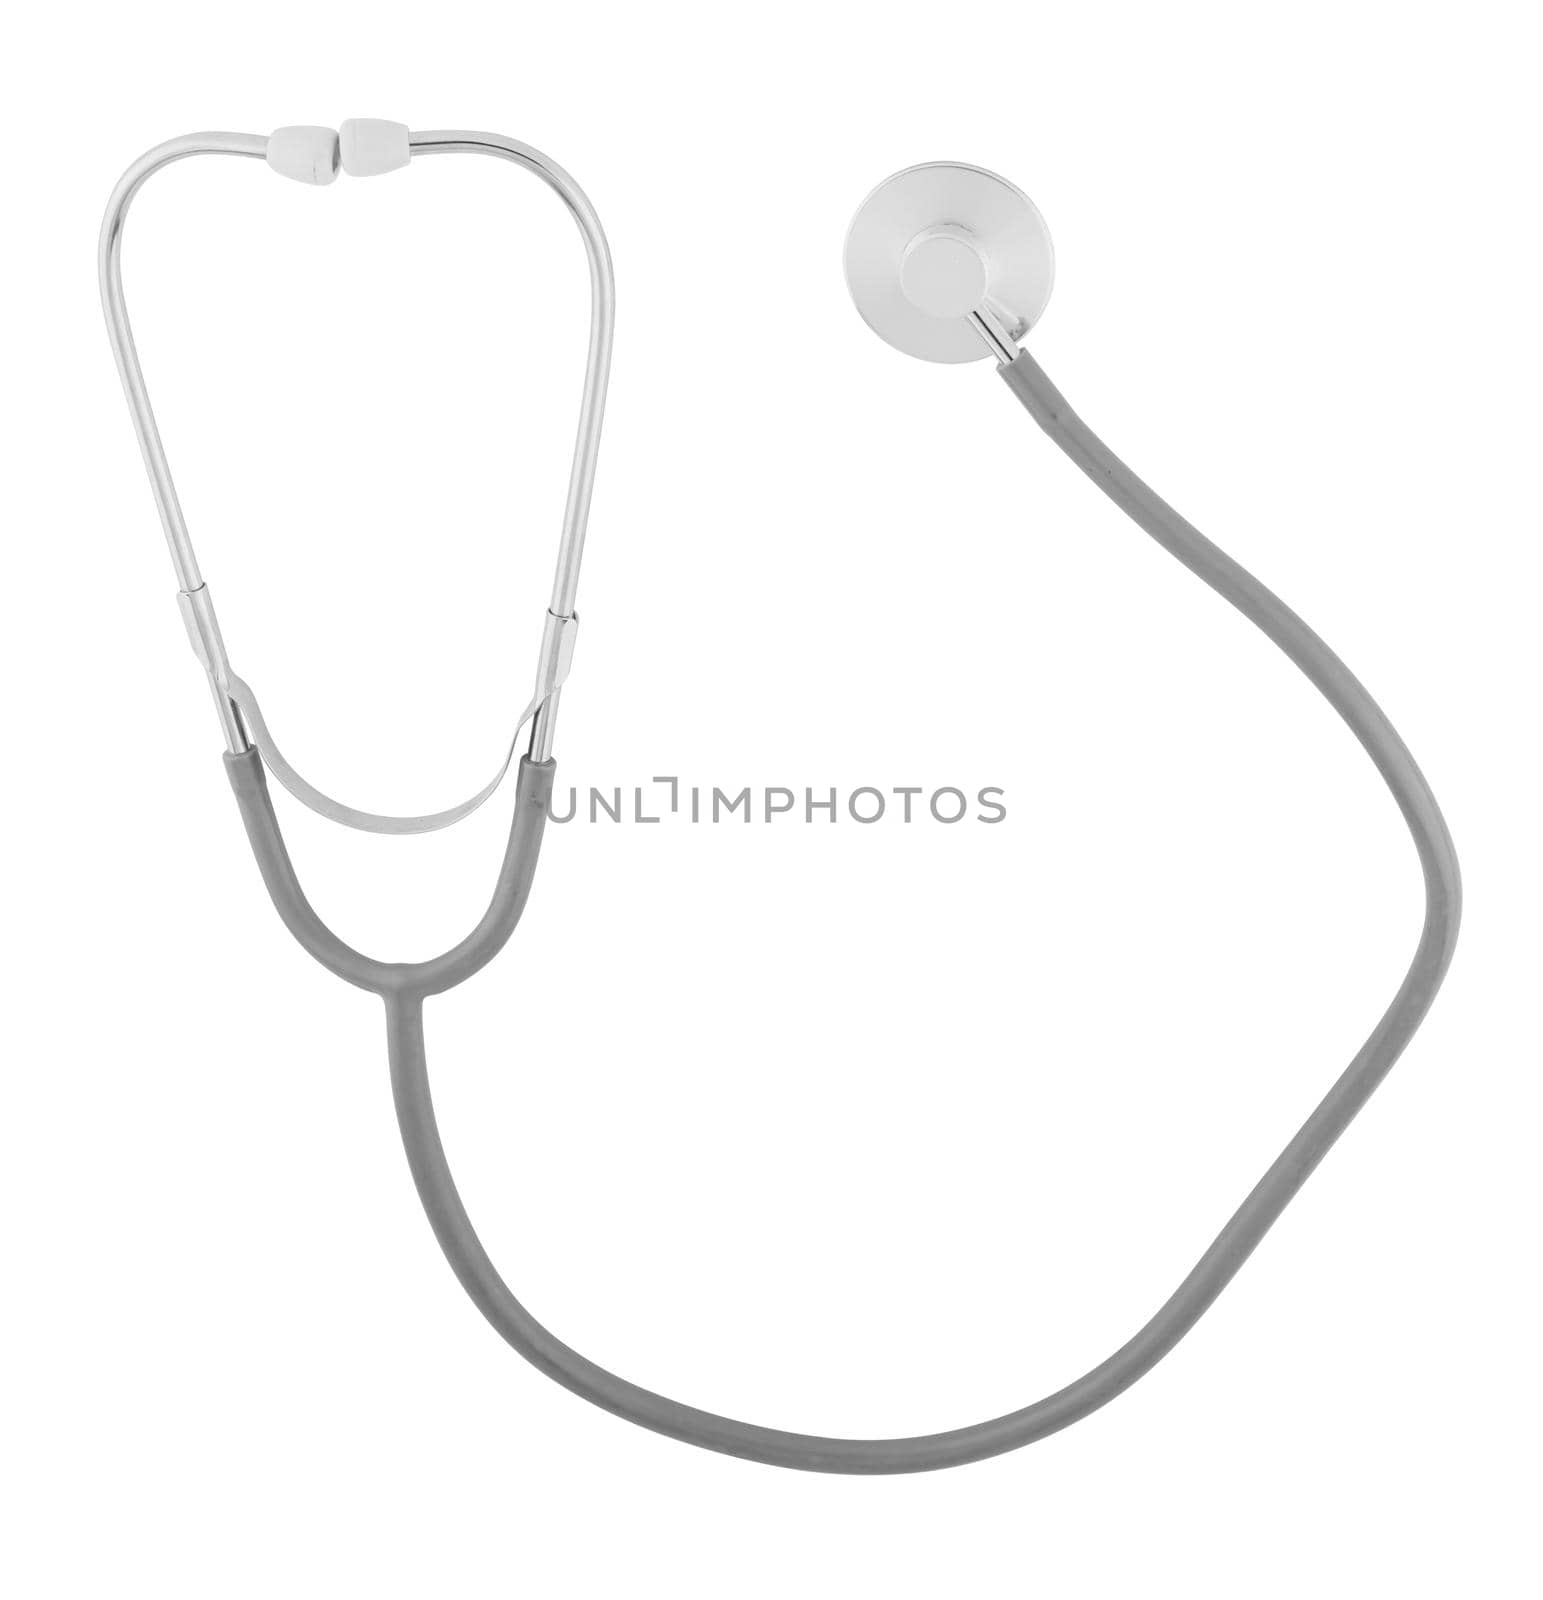 Stethophonendoscope, a medical diagnostic device on a white background in isolation